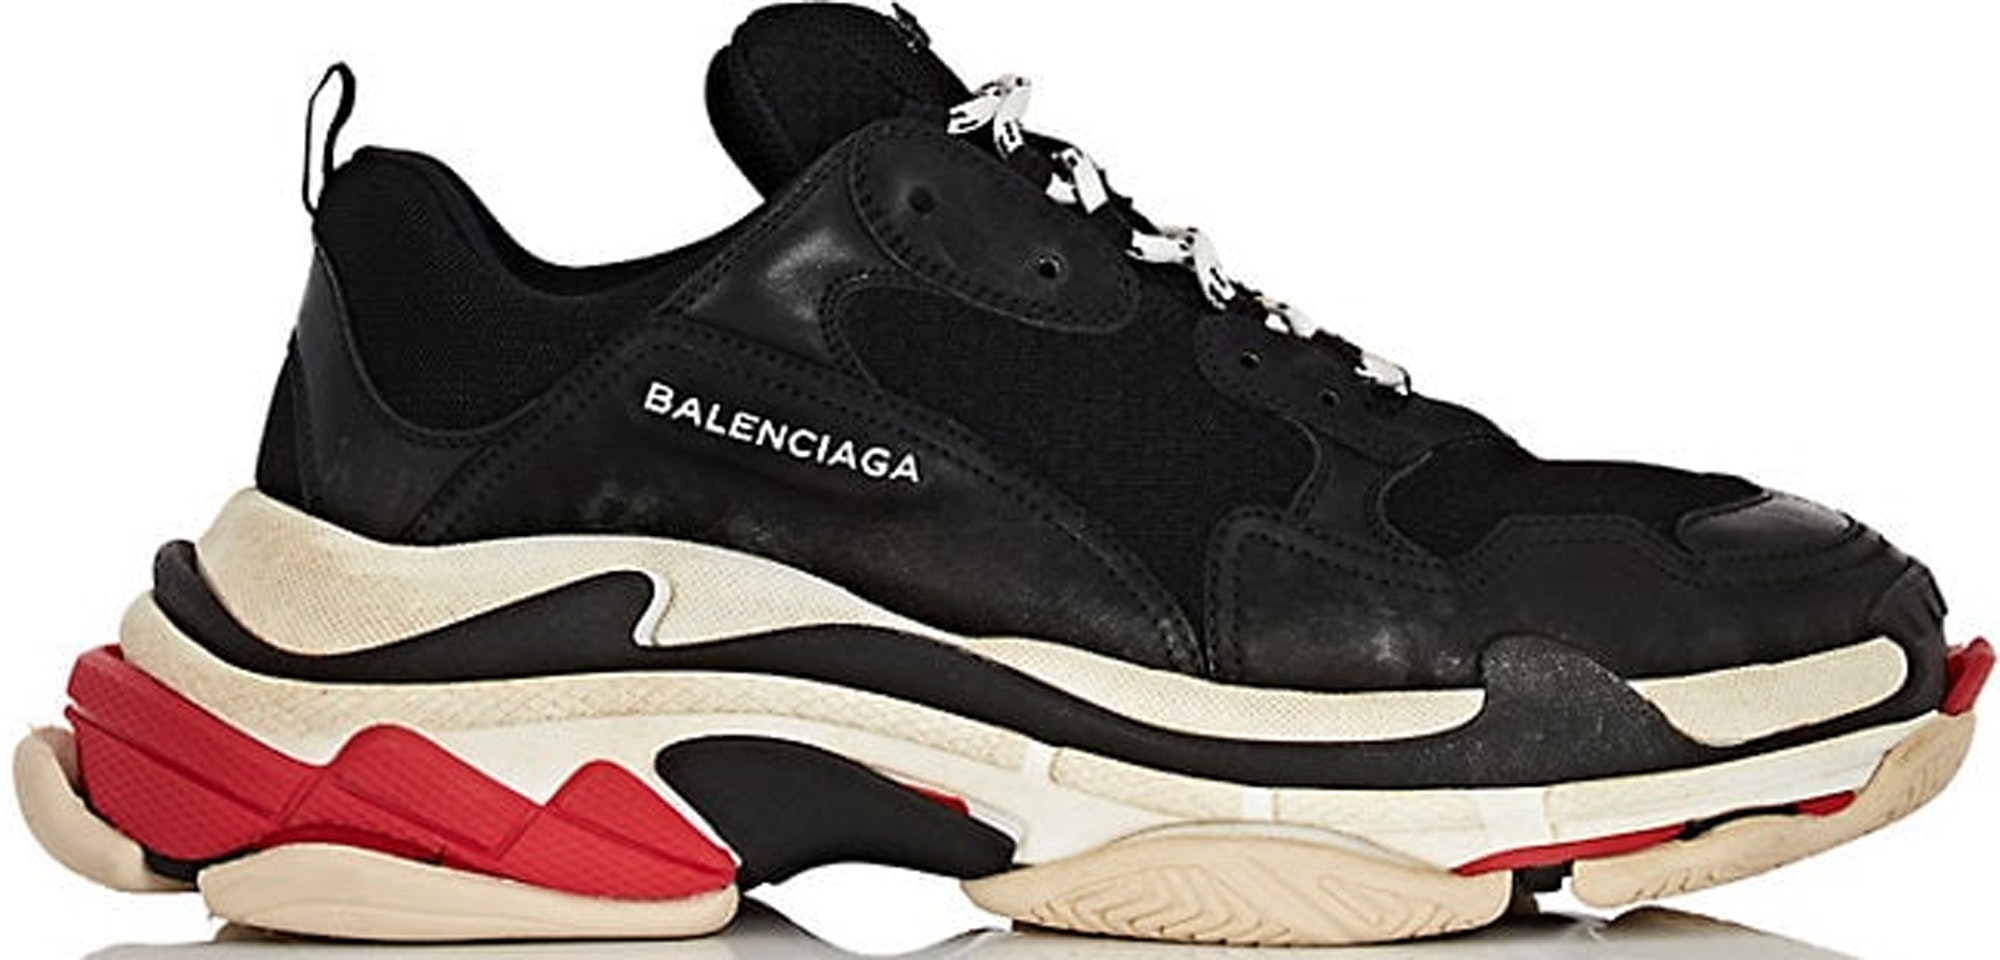 Balenciaga Triple S Sneaker White Red Black - High boots and others   Long-time wearers of the sneaker say that they havent held up - Jackboots -  HotelomegaShops - Women's shoes 